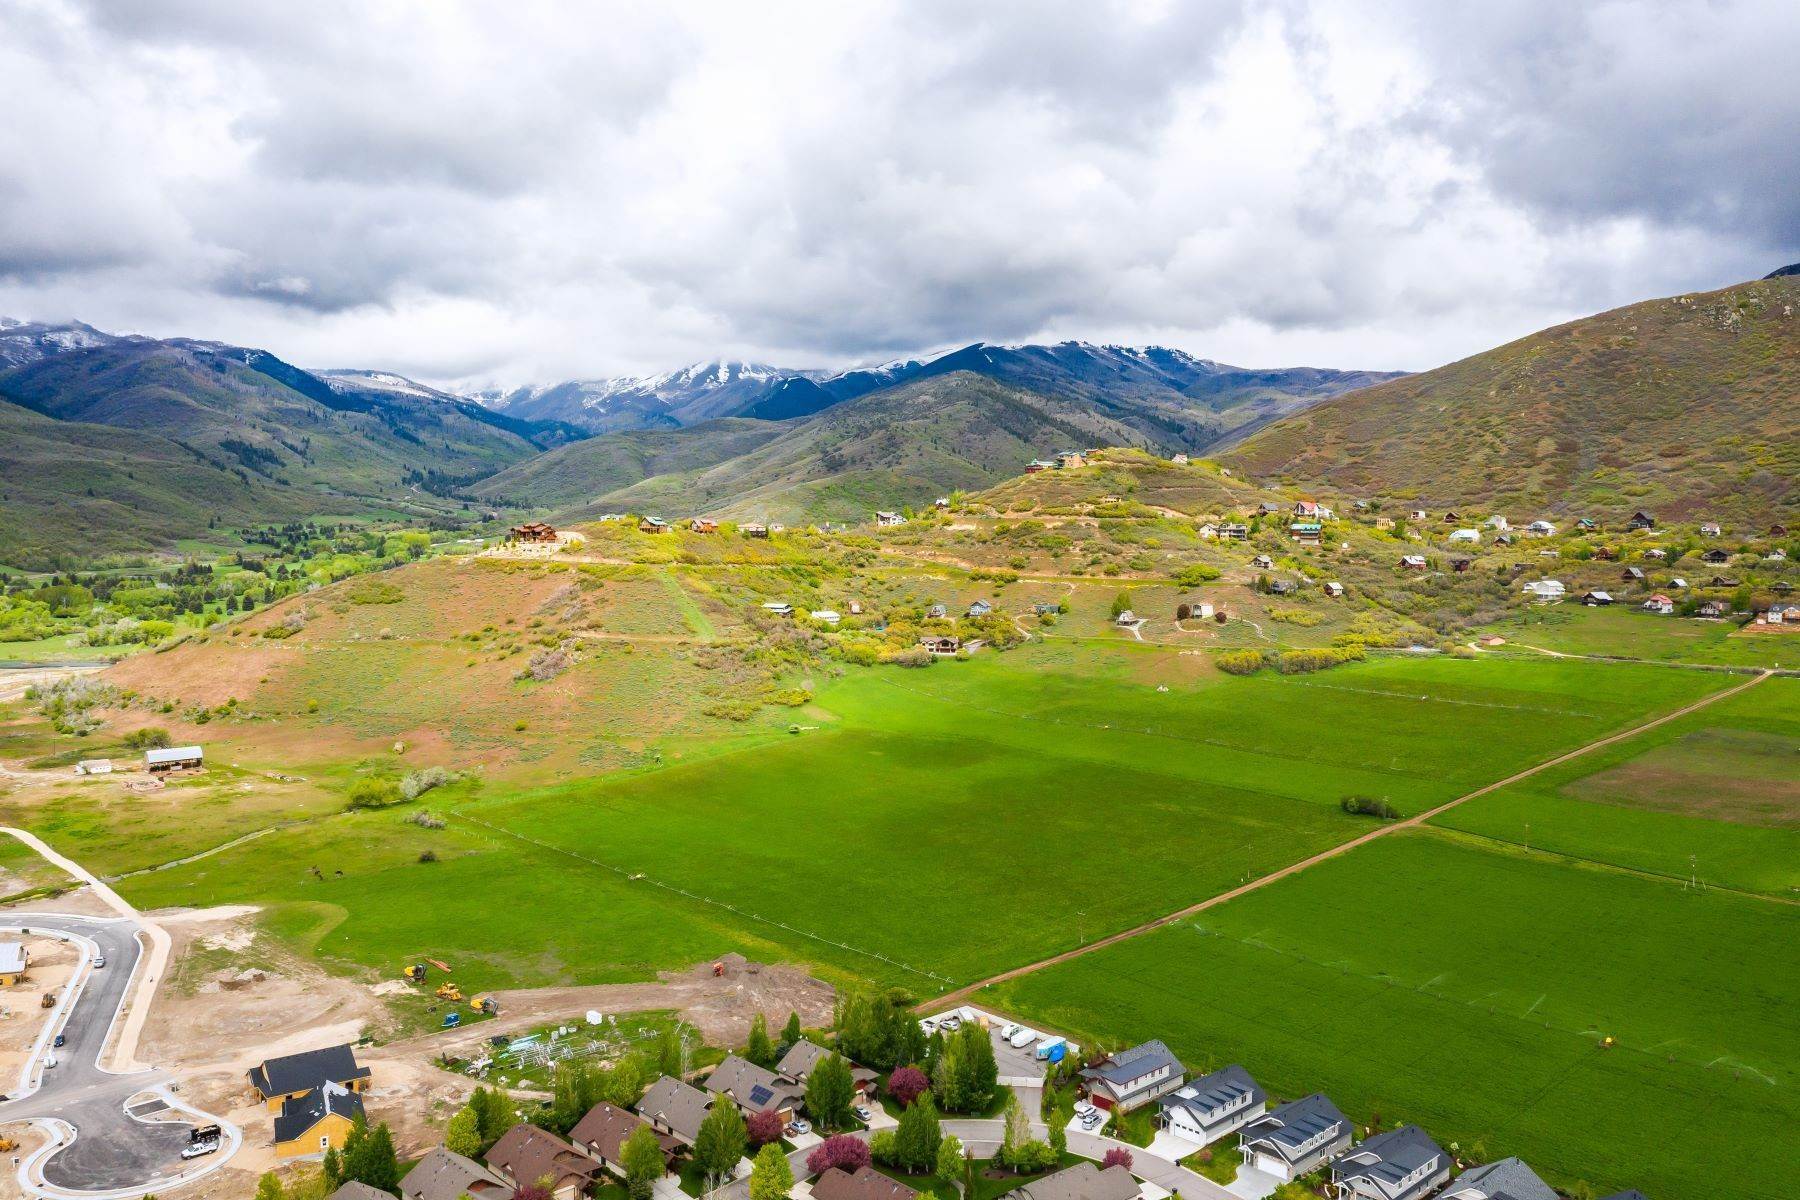 Single Family Homes for Sale at The Last 2 Lots To Be Built by Probst Enterprises Are Now Released and Available 1507 N Canyon View Road Midway, Utah 84049 United States